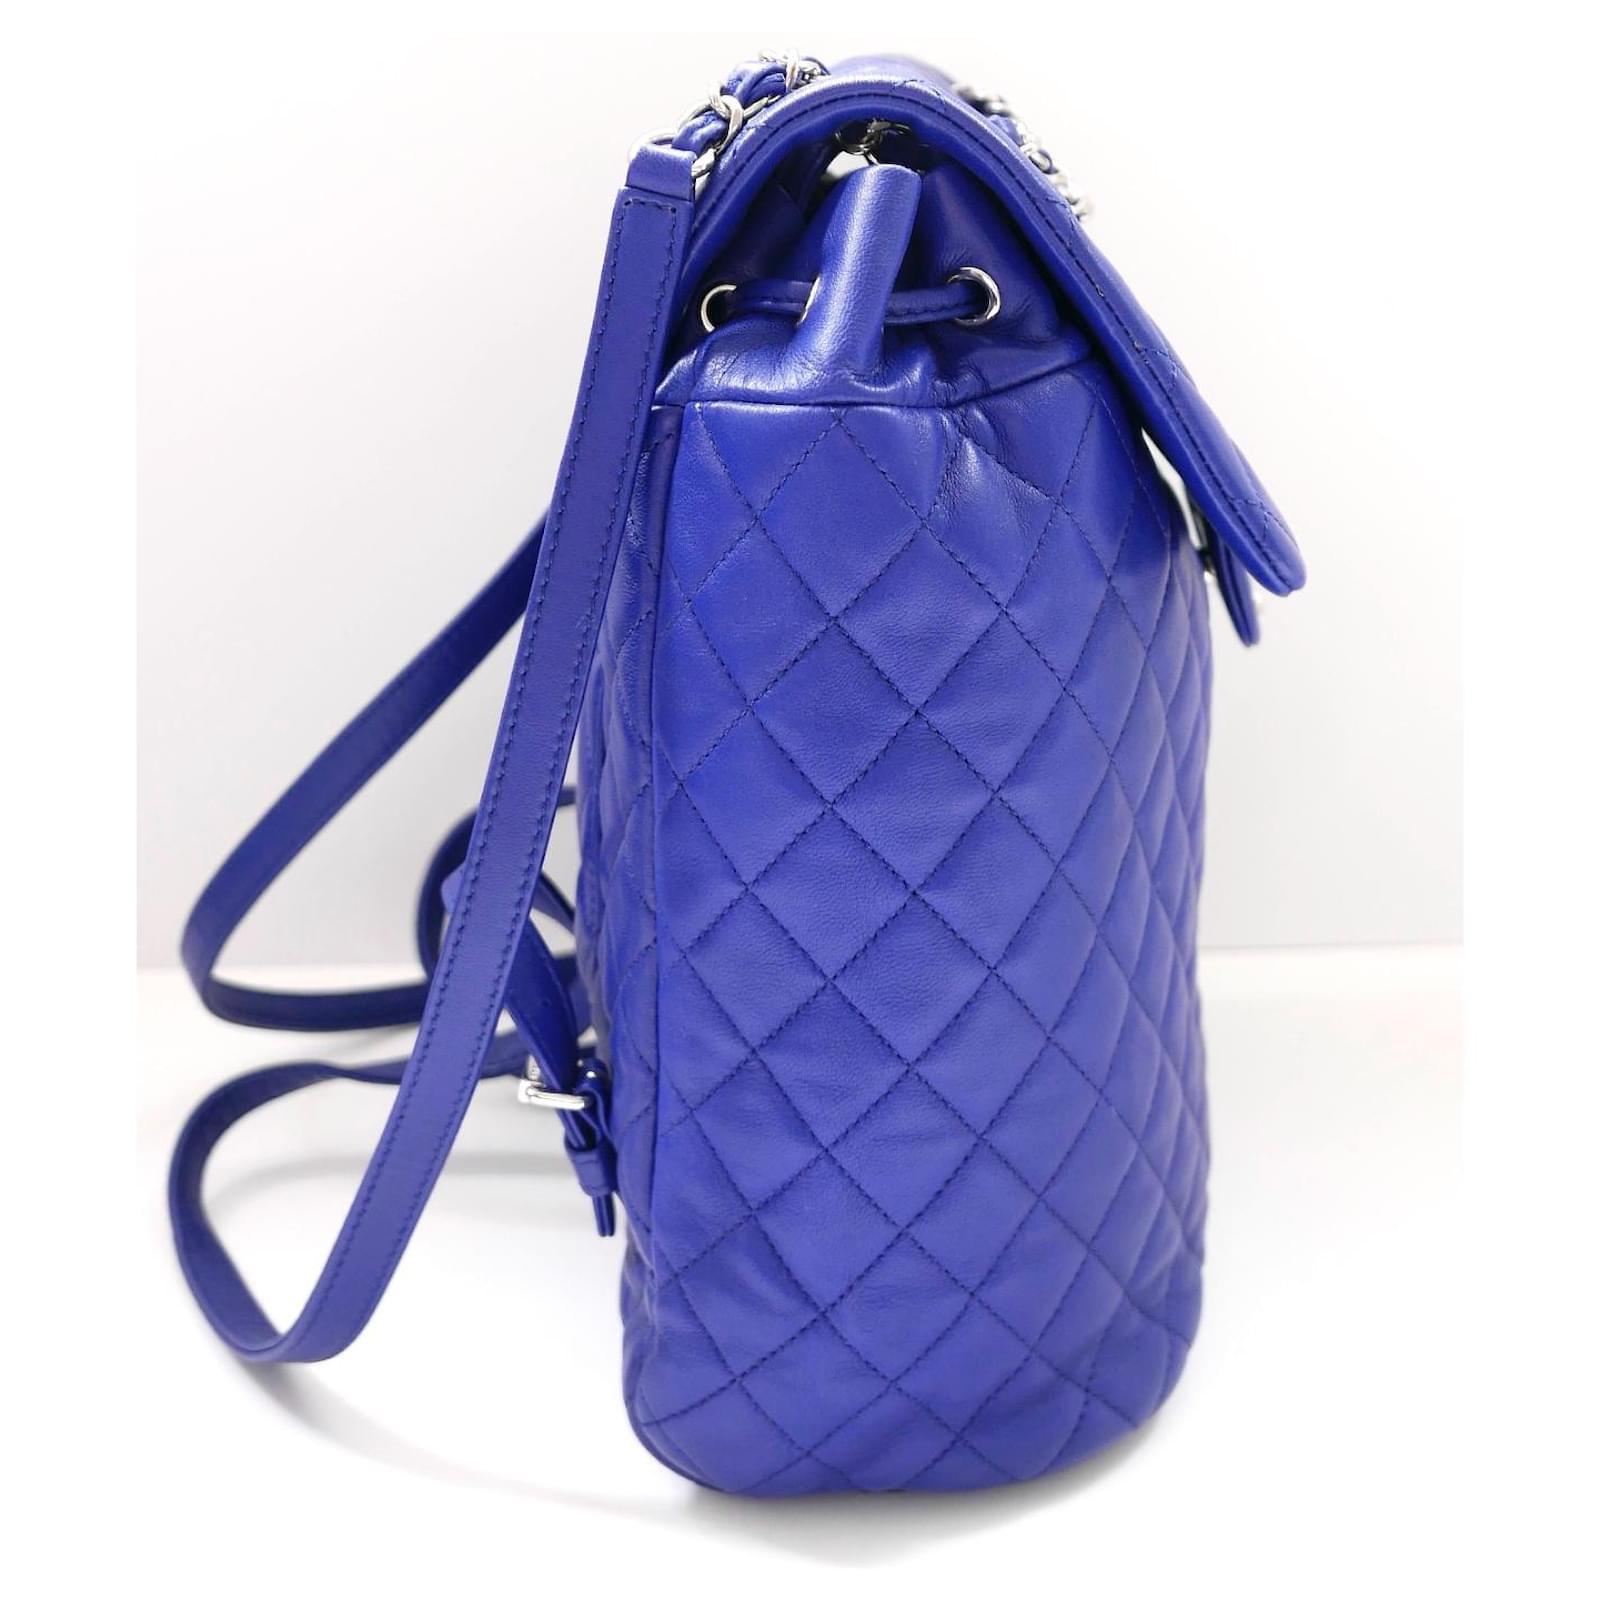 Chanel Urban Spirit Backpack Blue Lamb Leather In Excellent Condition For Sale In London, GB